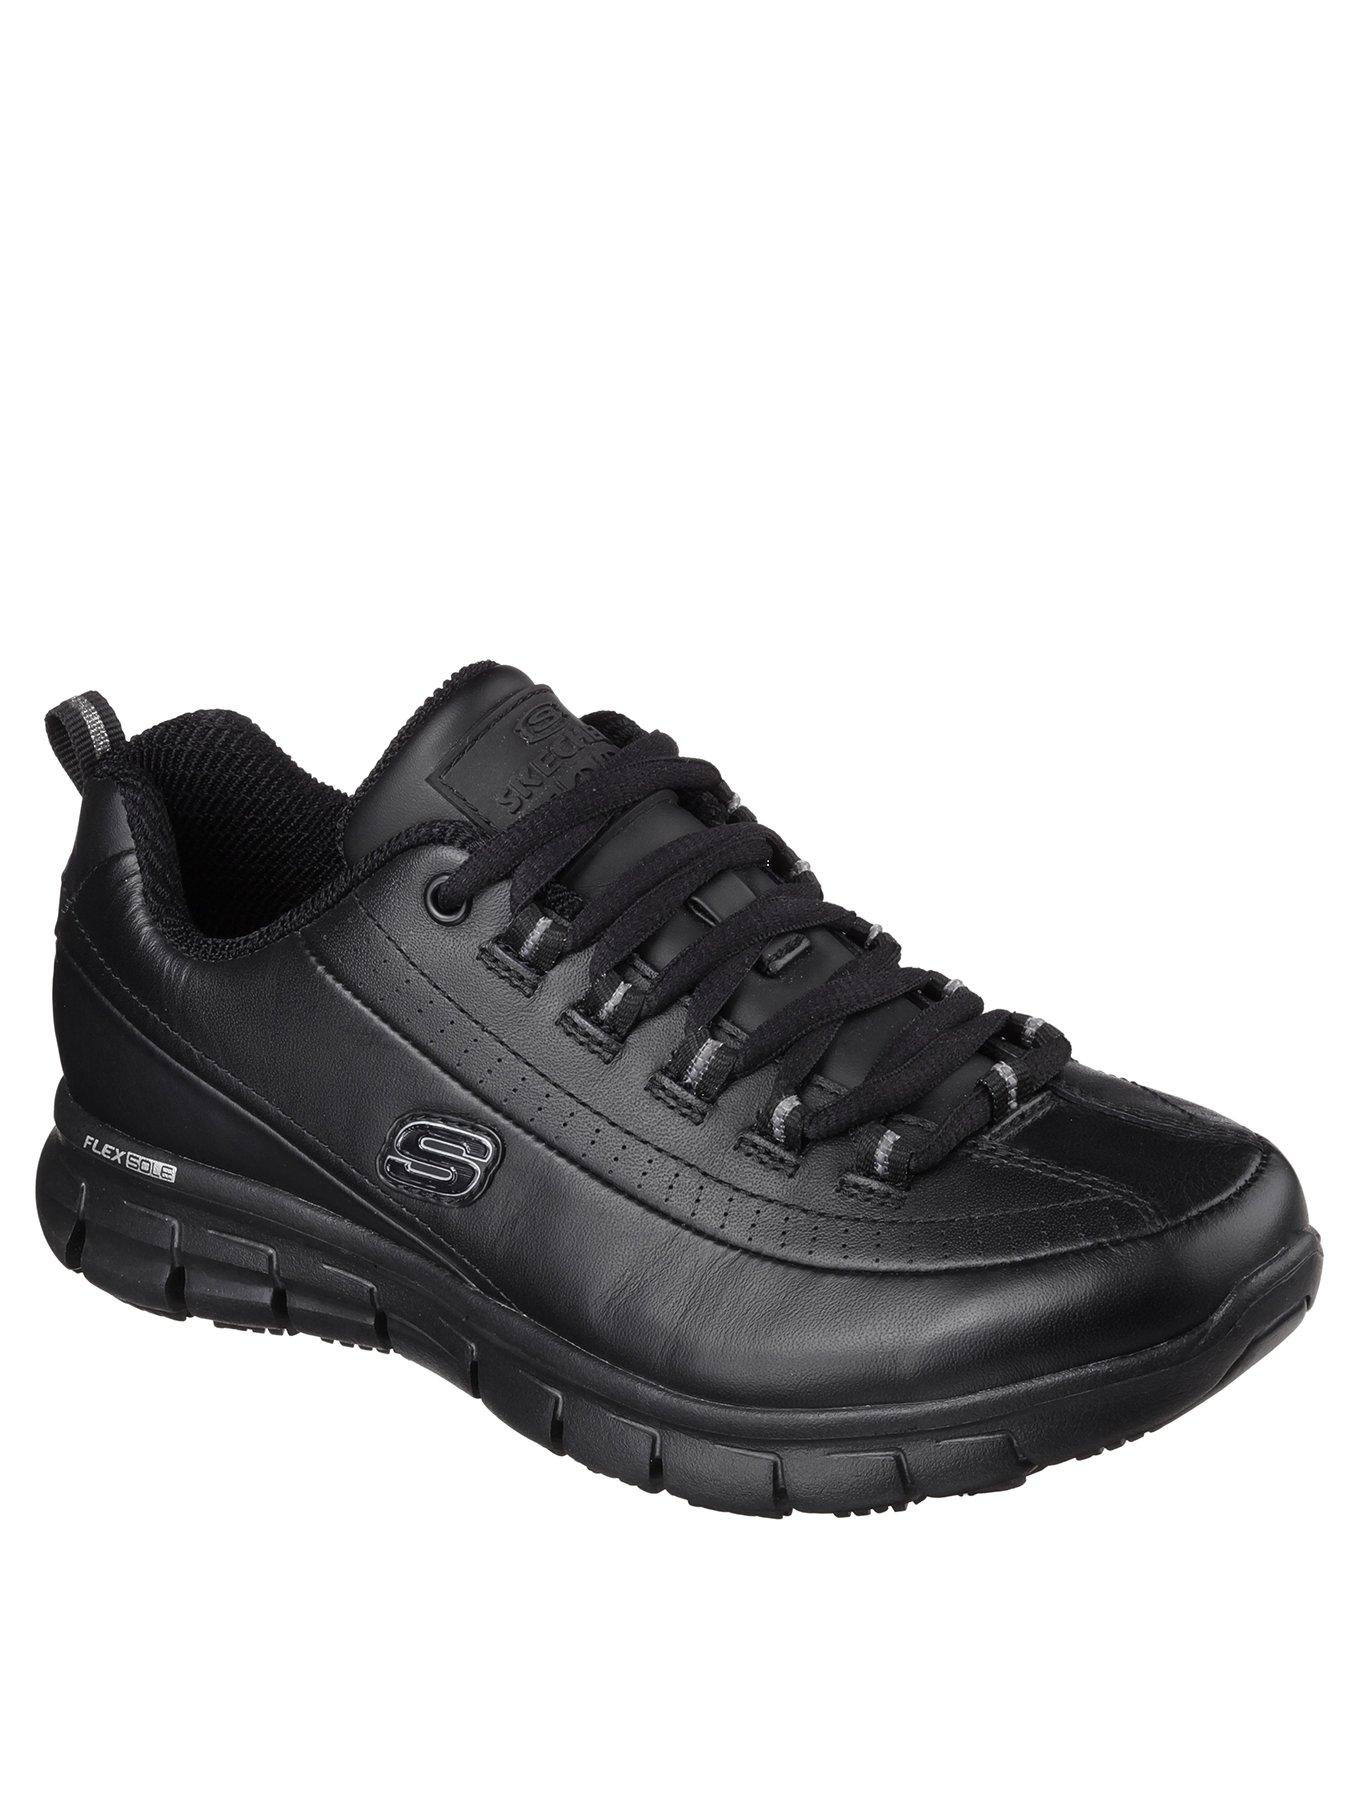 skechers work relaxed fit sure track uk